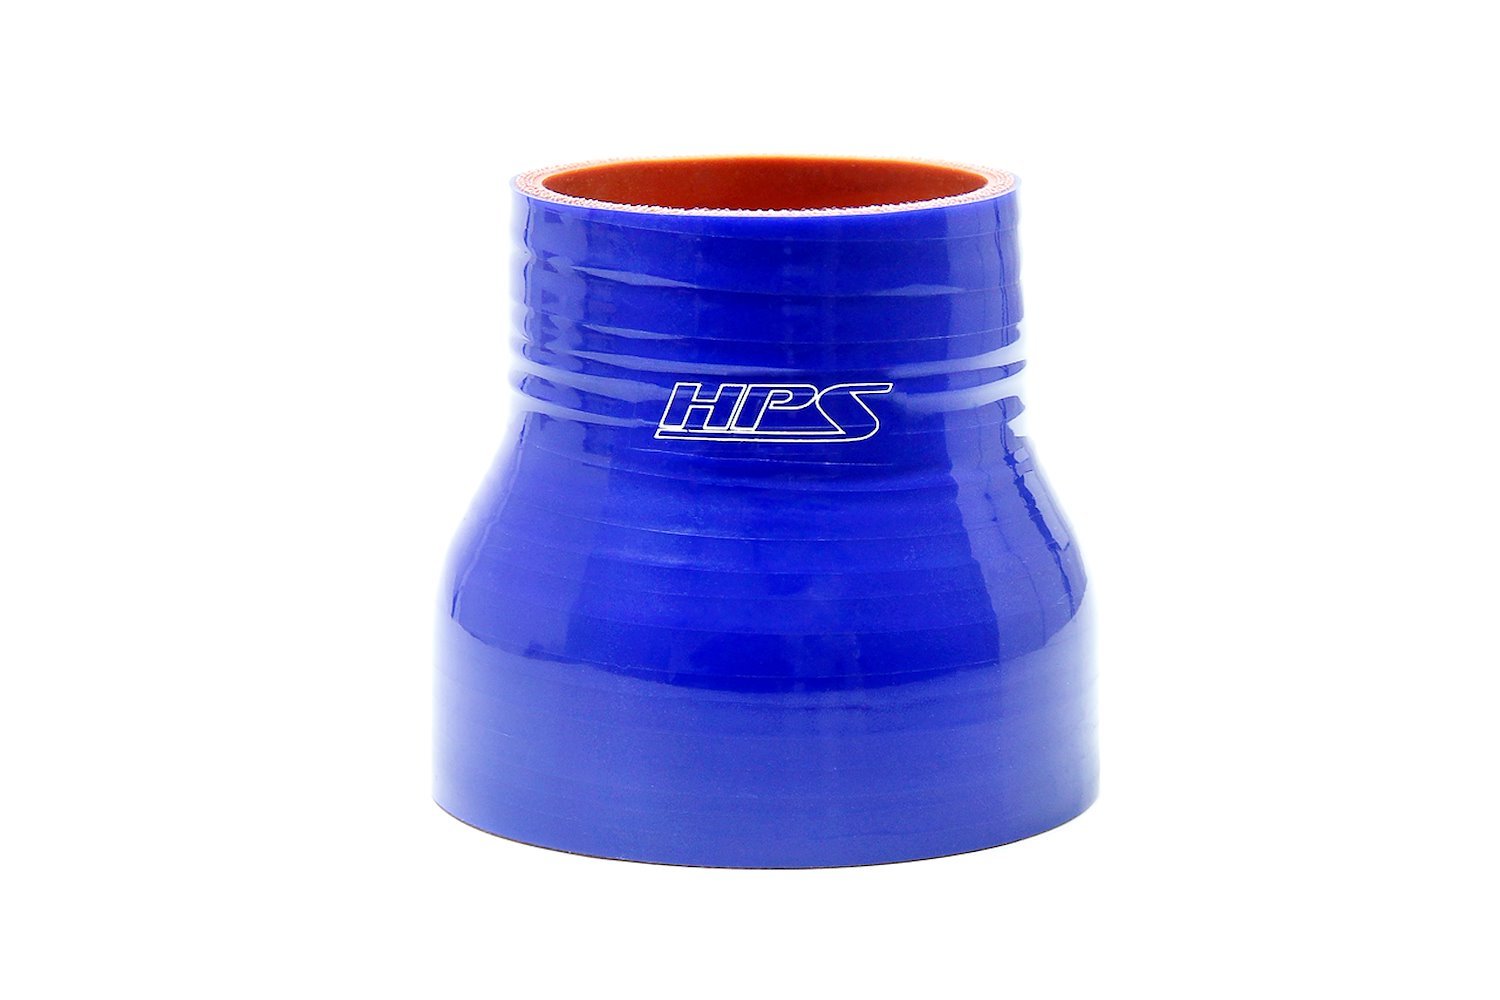 HTSR-250-400-L4-BLUE Silicone Reducer Hose, High-Temp 4-Ply Reinforced, 2-1/2 in. - 4 in. ID, 4 in. Long, Blue